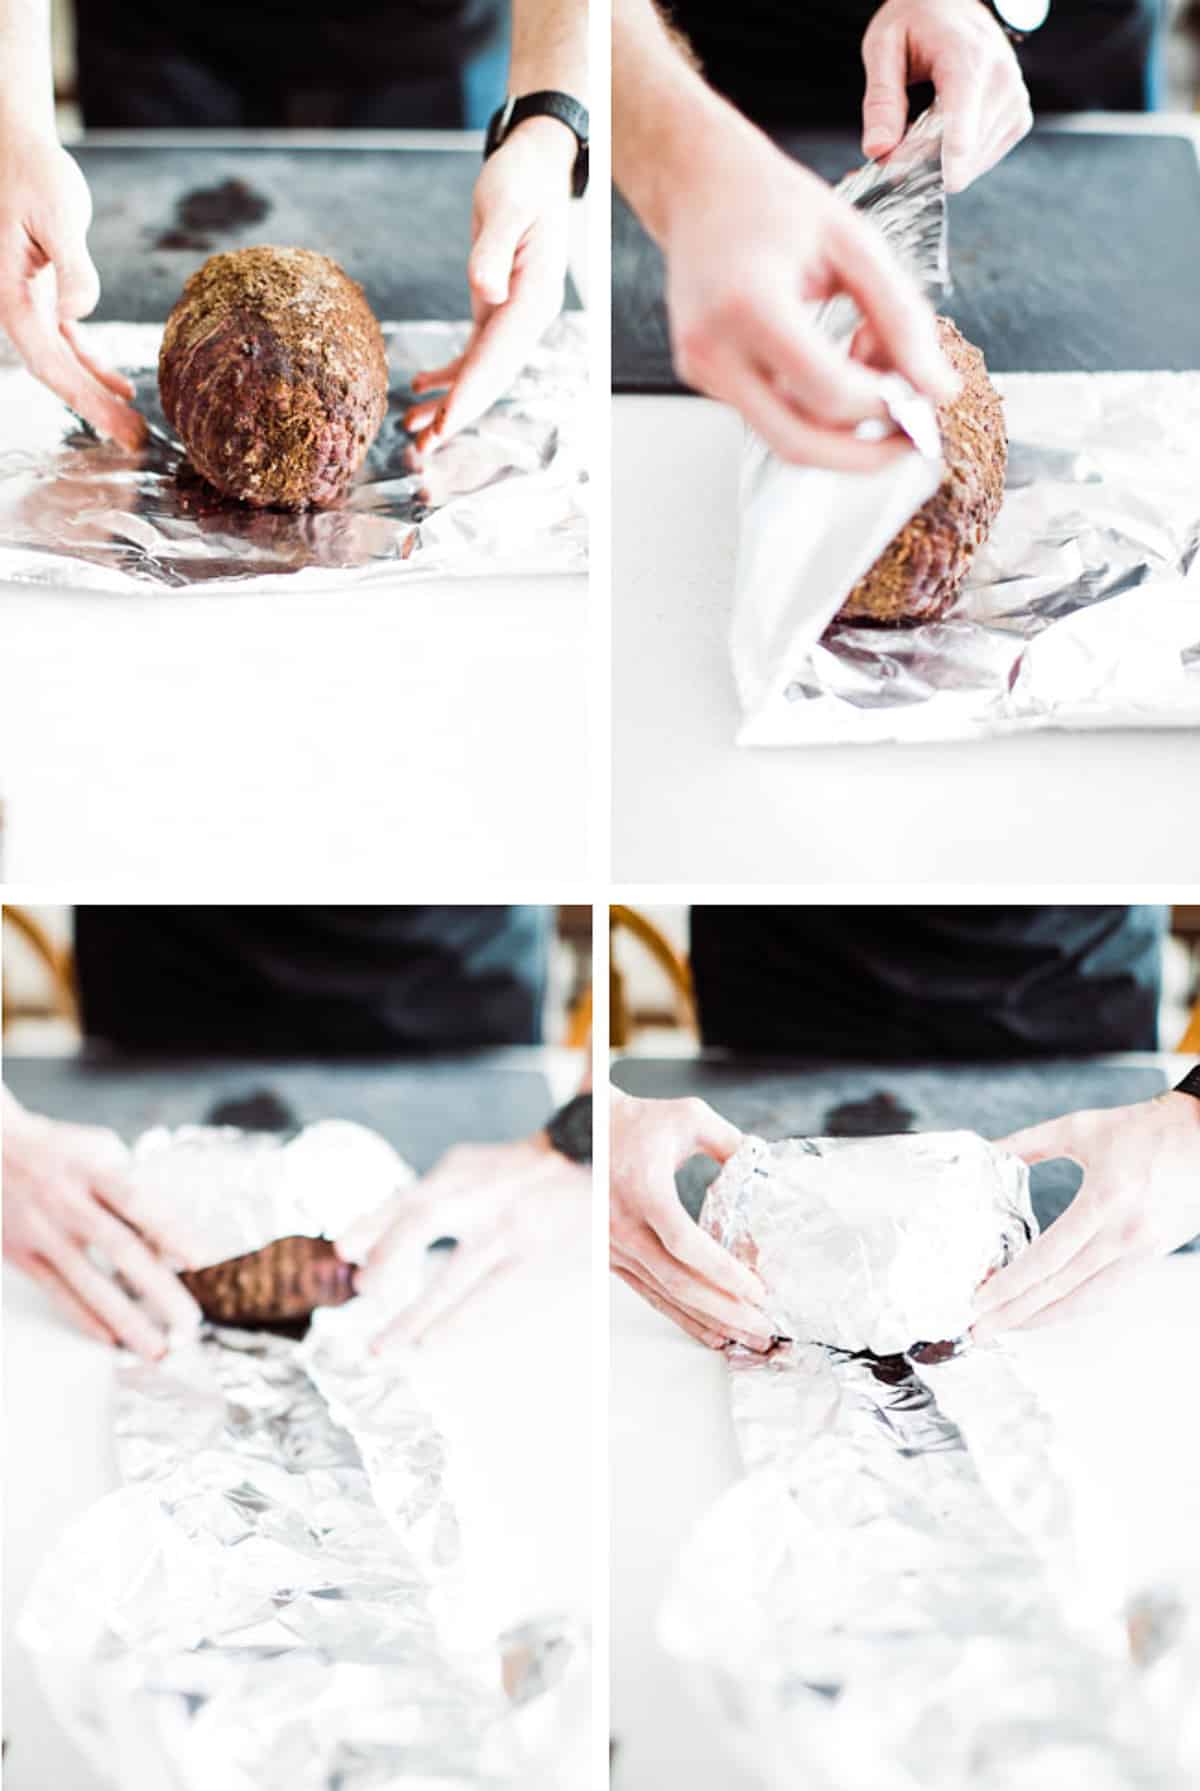 Collage of images showing wrapping lamb in foil to allow to rest.